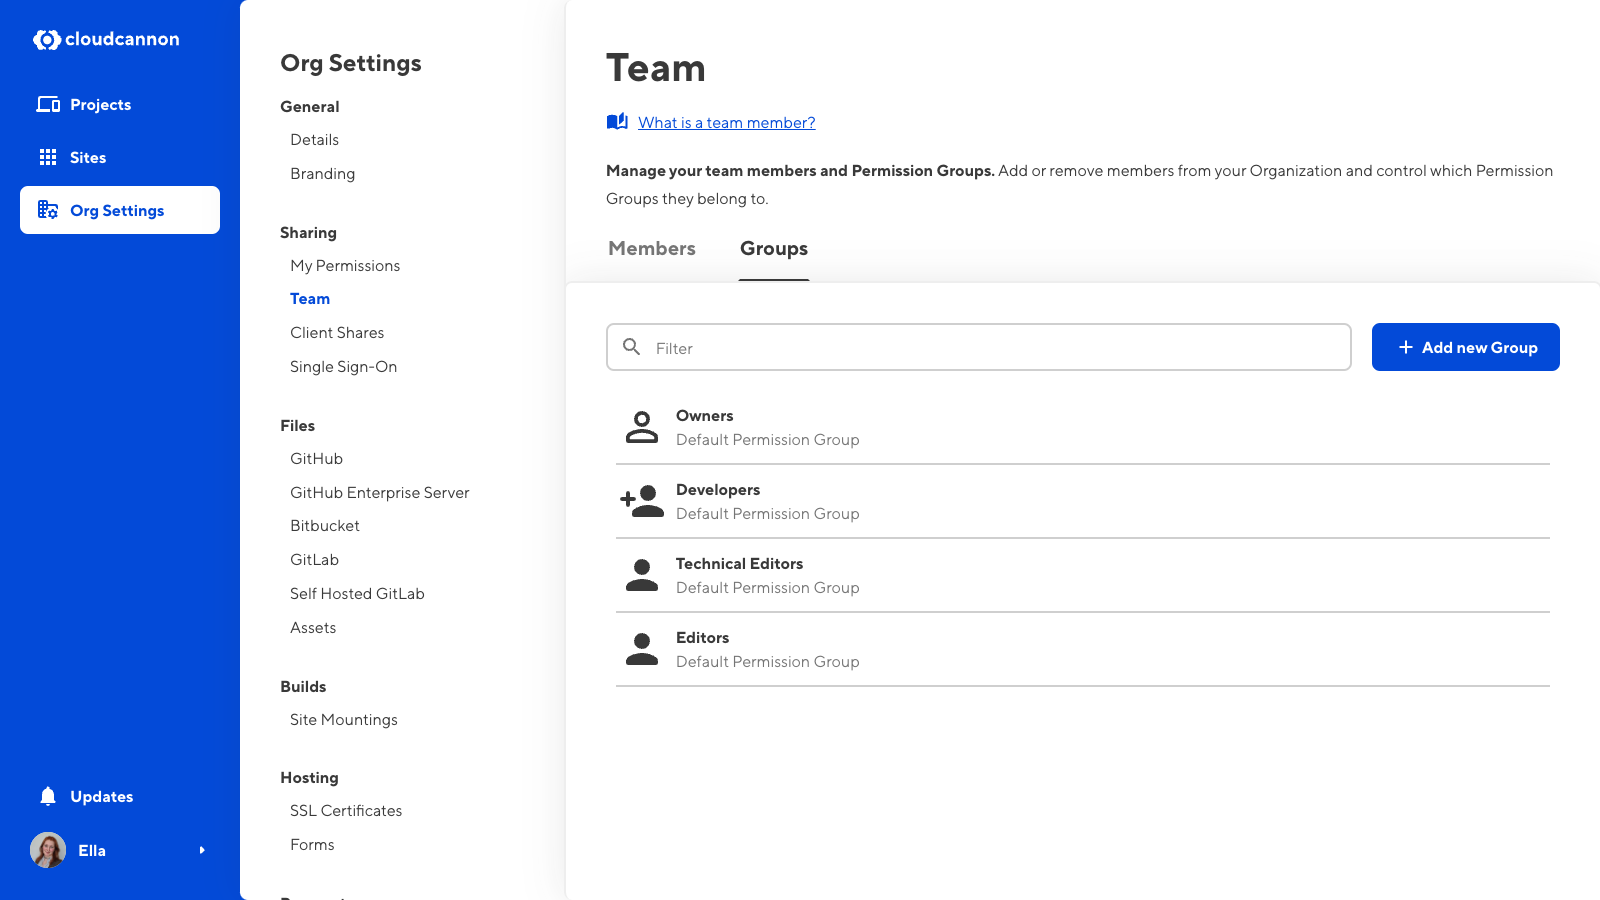 A screenshot of the Team page shows two team members and the + Add Groups button.